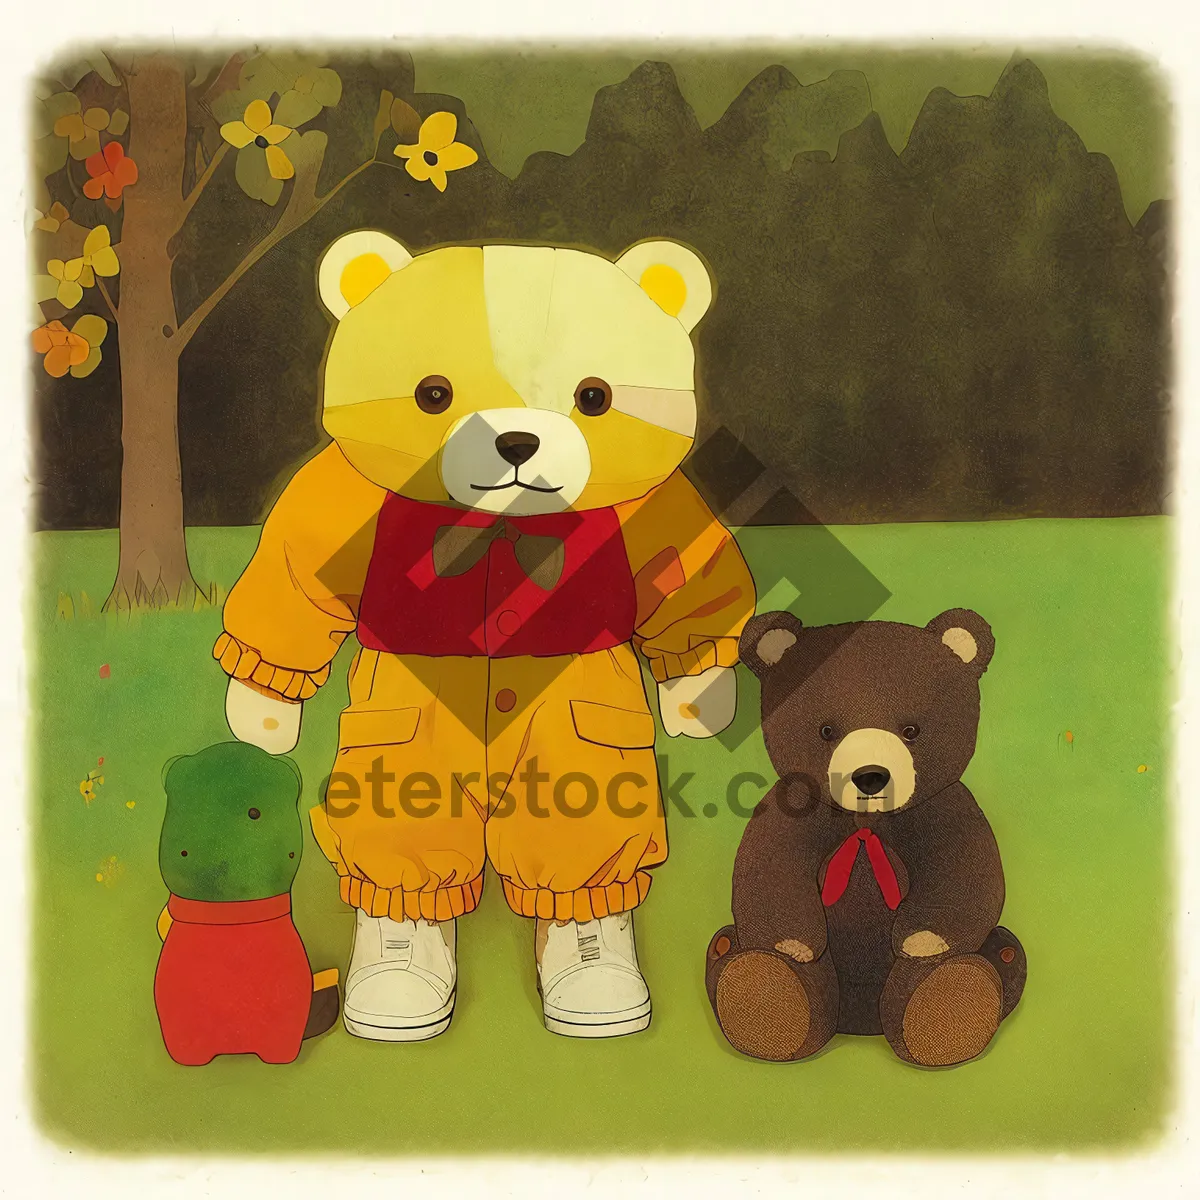 Picture of Cute Teddy and Fluffy Plaything for Childhood Joy